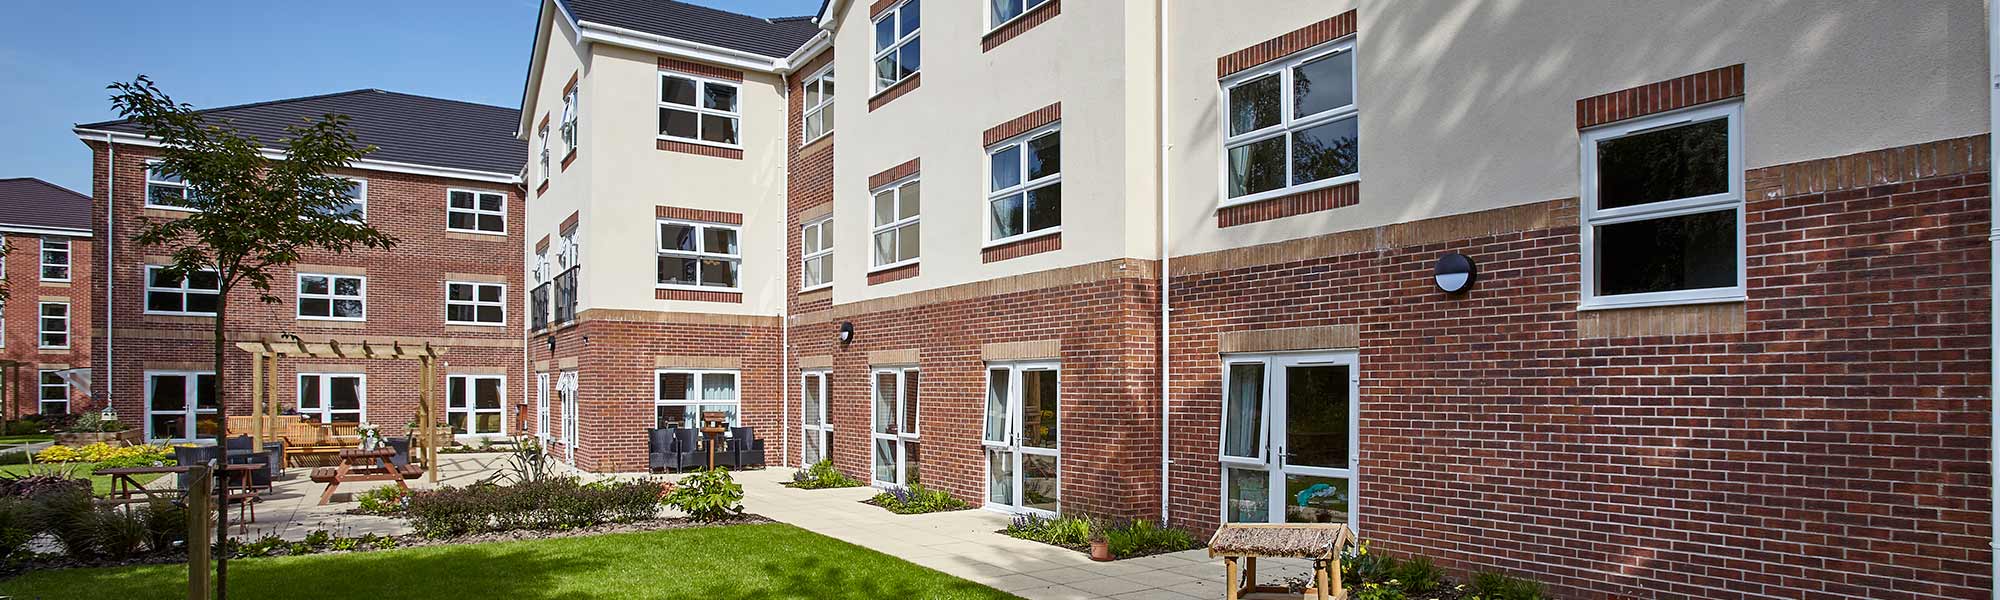 Private care home in Nottingham